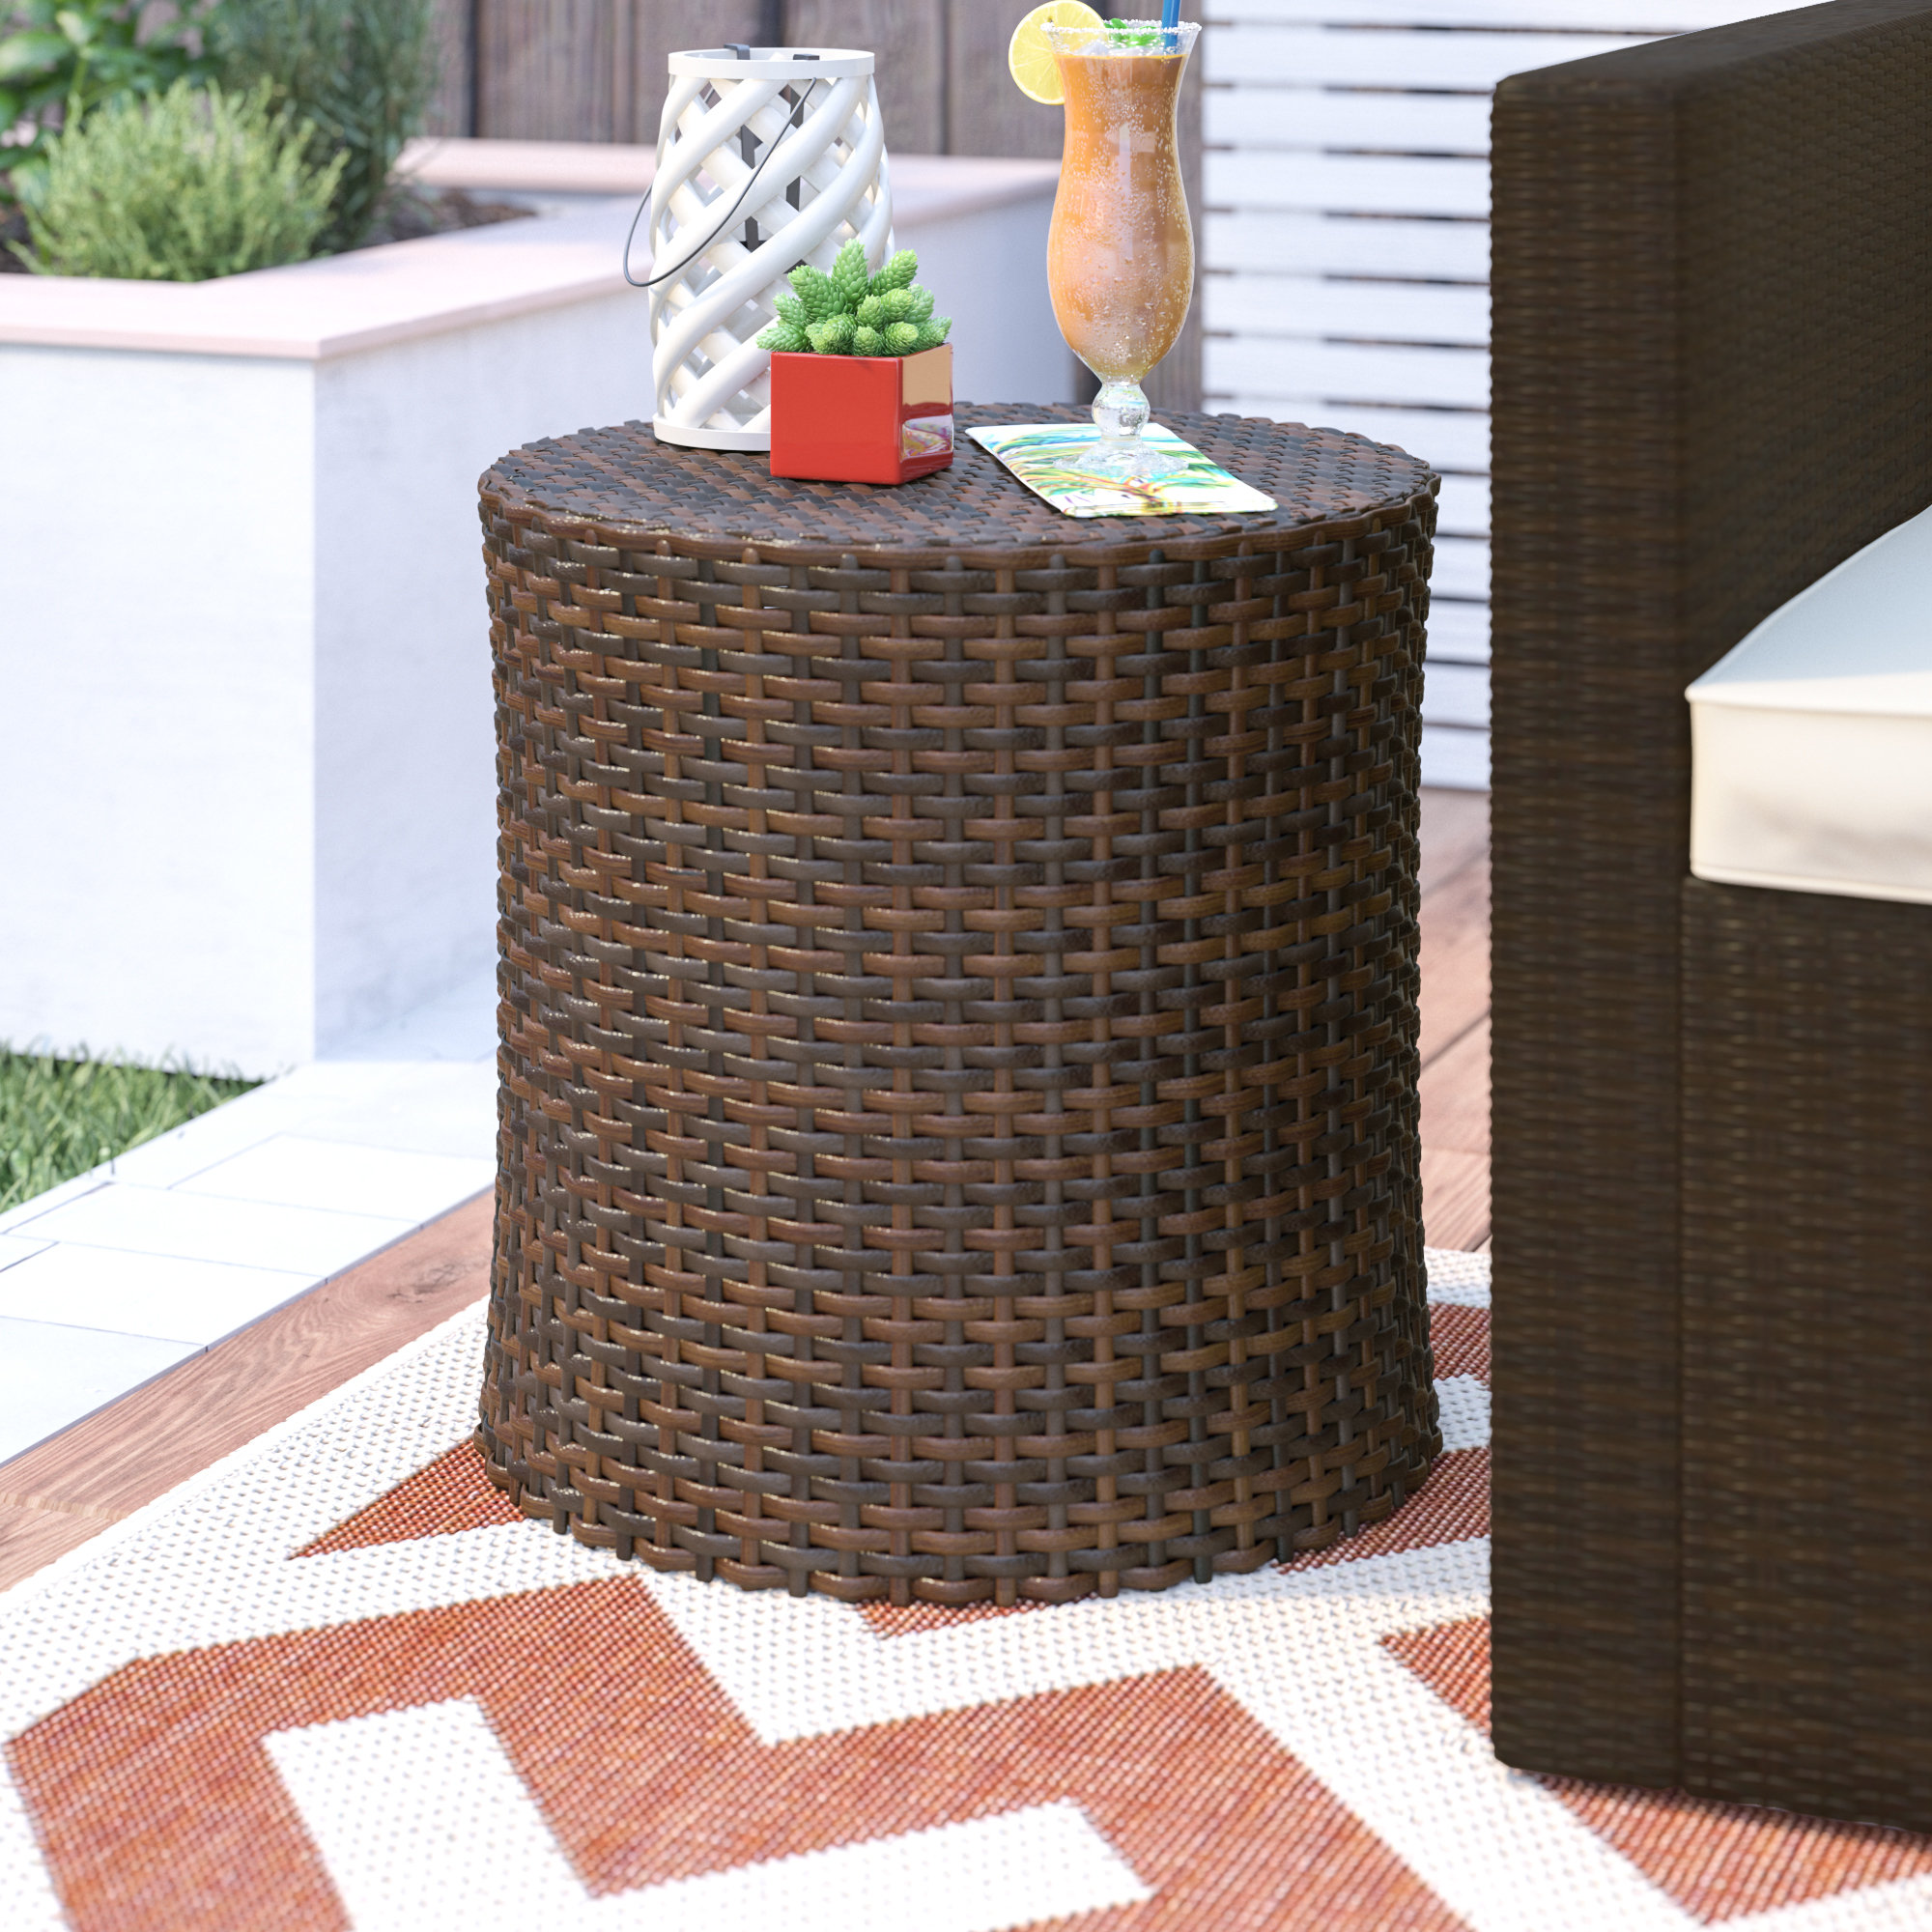 mercury row mazzella bluestar barrel wicker side table reviews outdoor brown large round dining walnut nest tables slim console with drawers room vanity unit basin very thin night